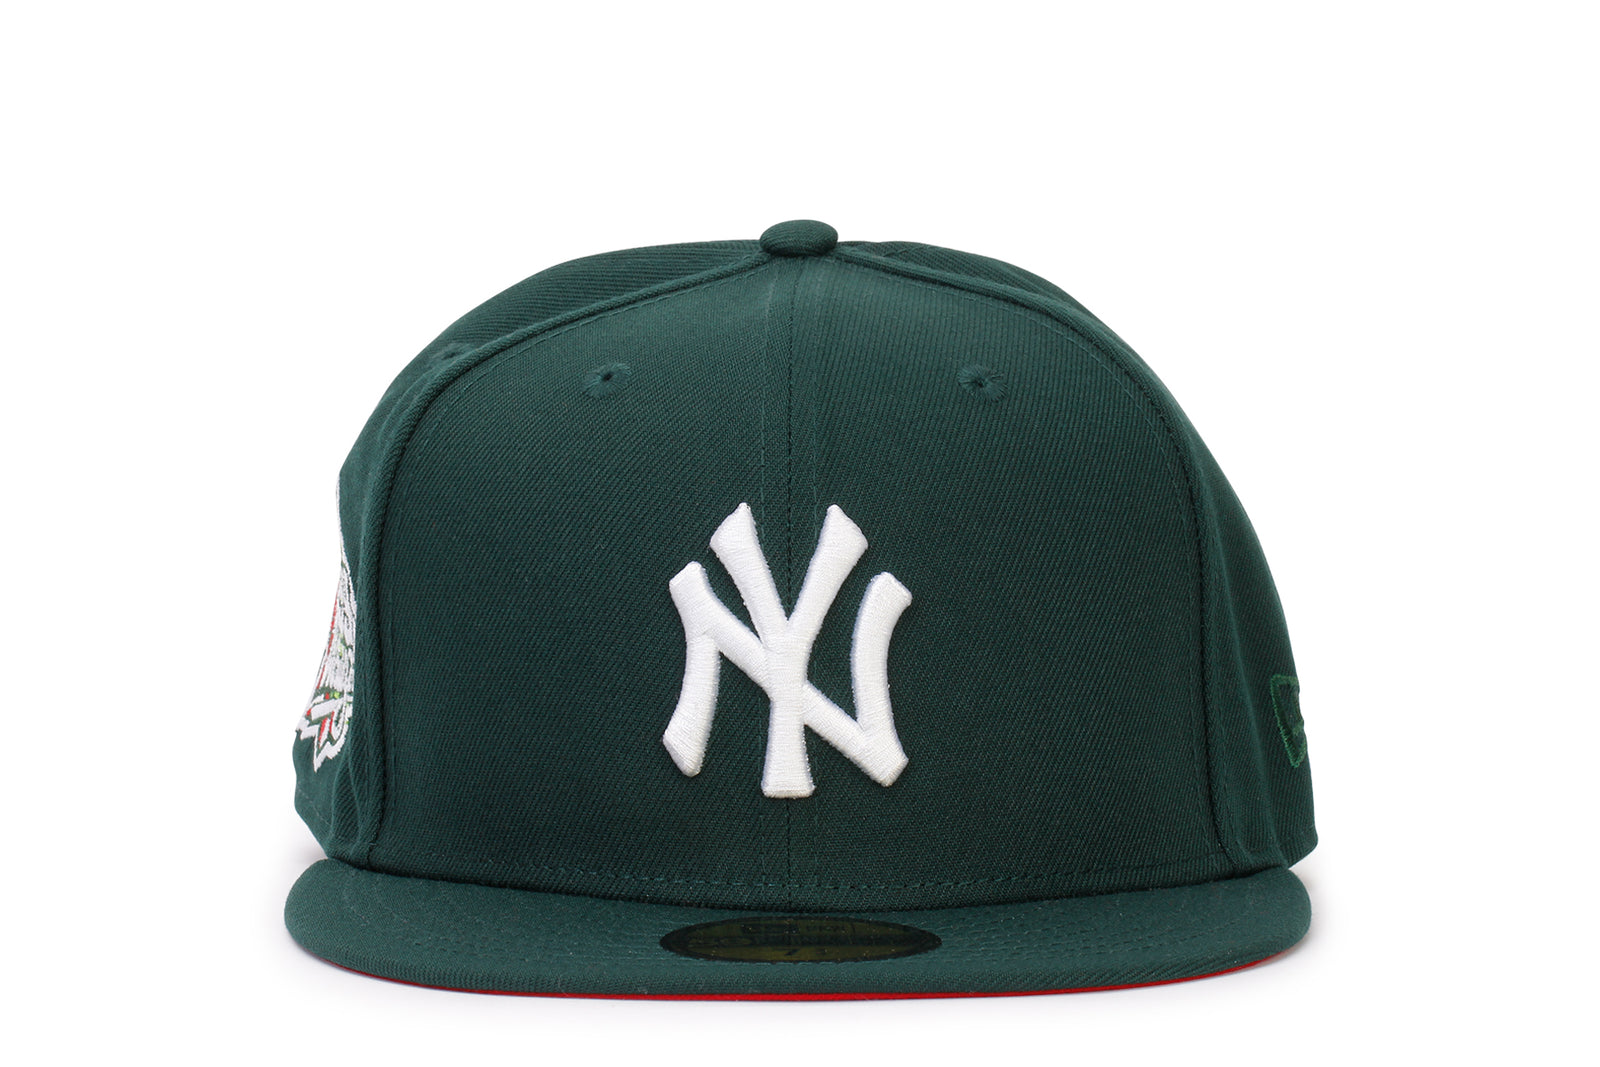 New Era 59FIFTY New York Yankees Camp Fitted Hat 7 3/4 / Beige /Green